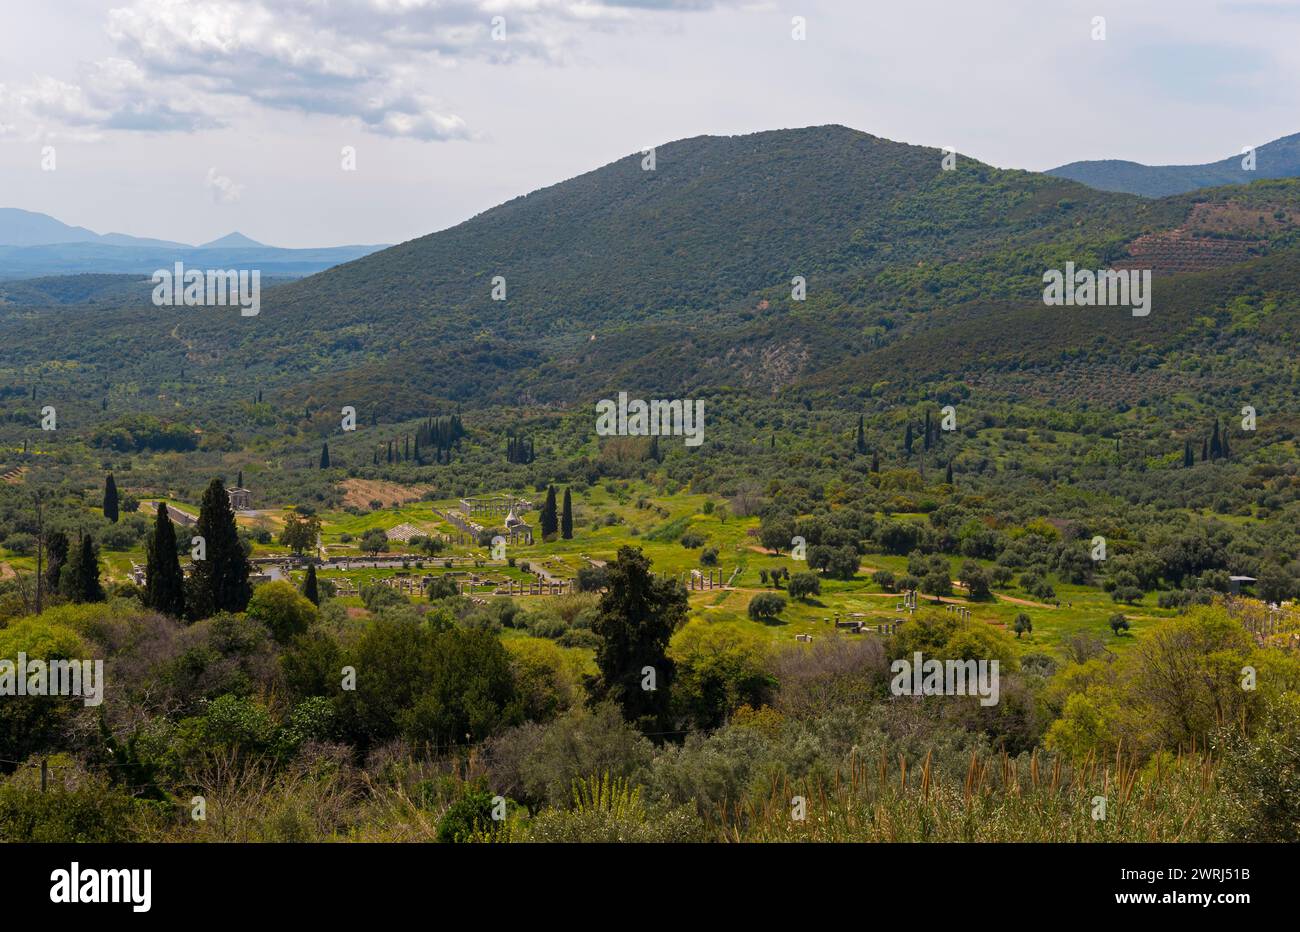 A peaceful landscape with green mountains, trees, farmland and a cloudy sky, view of Messene, ancient Greek polis, Messini, Messinia, Peloponnese Stock Photo